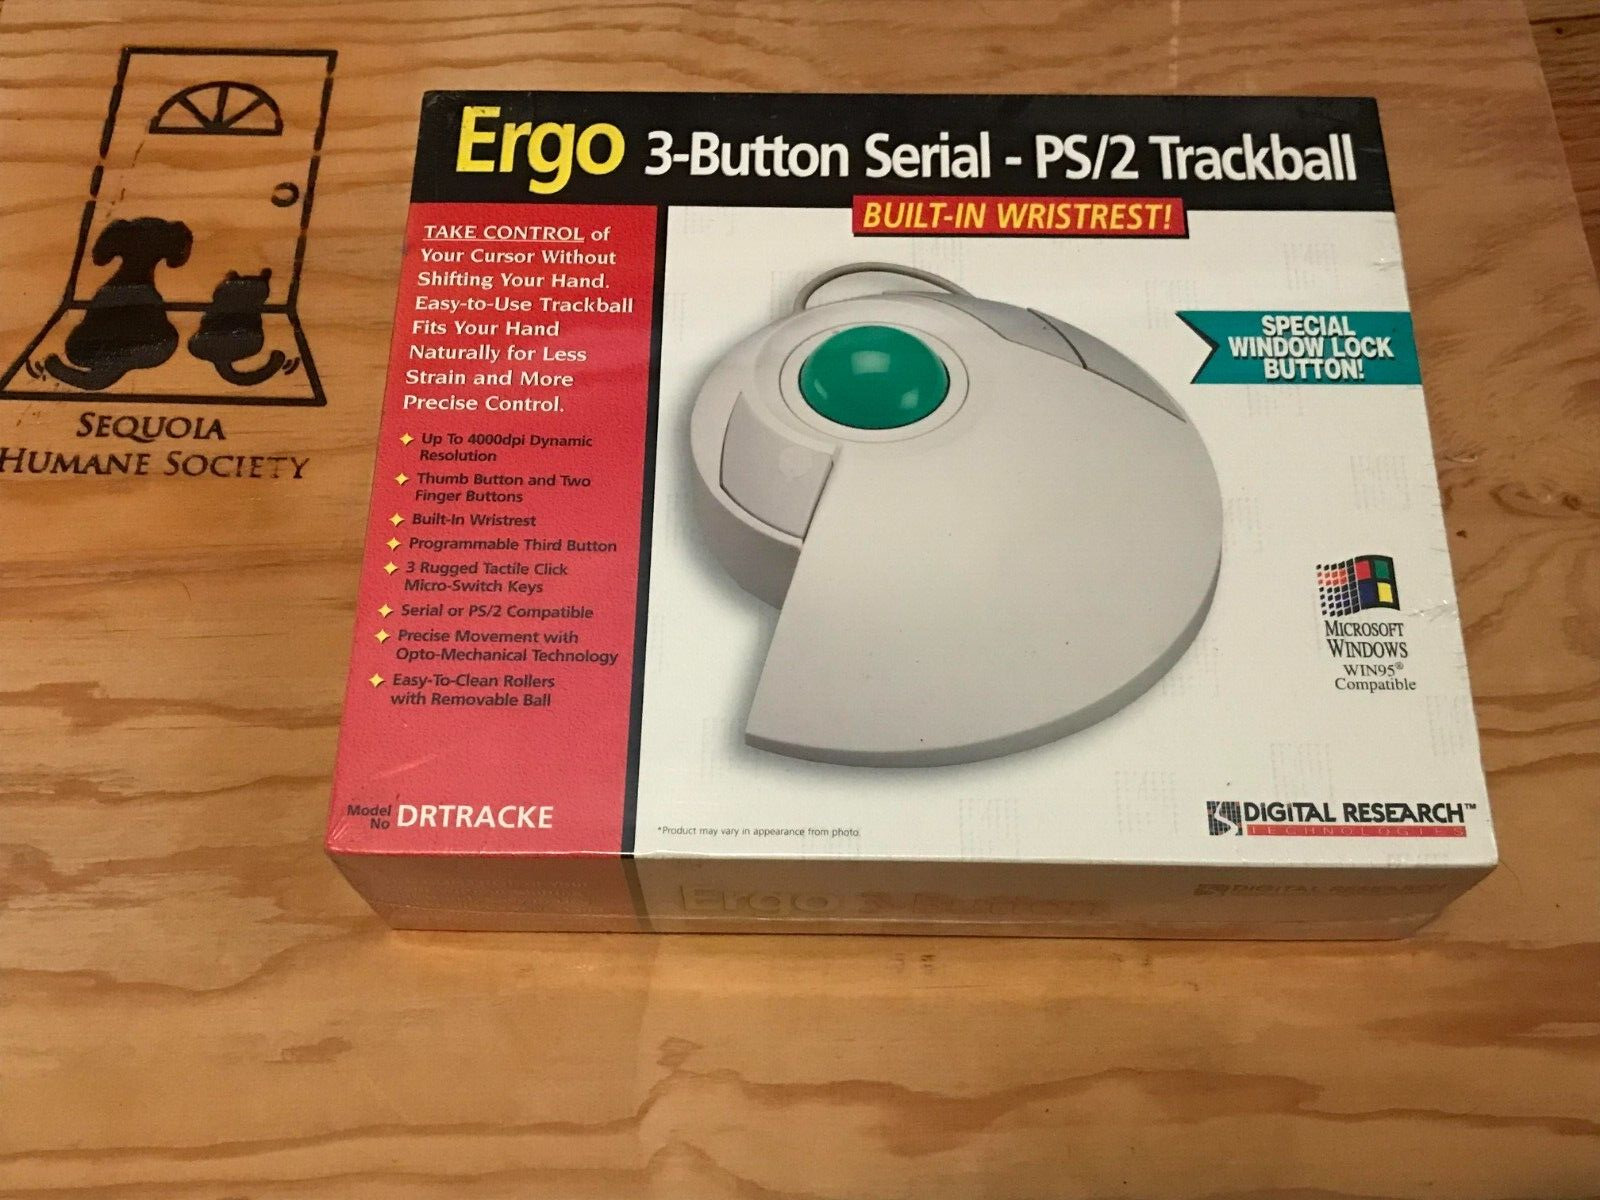 Digital Research Technology Ergo 3-Button Serial PS/2 Trackball Mouse